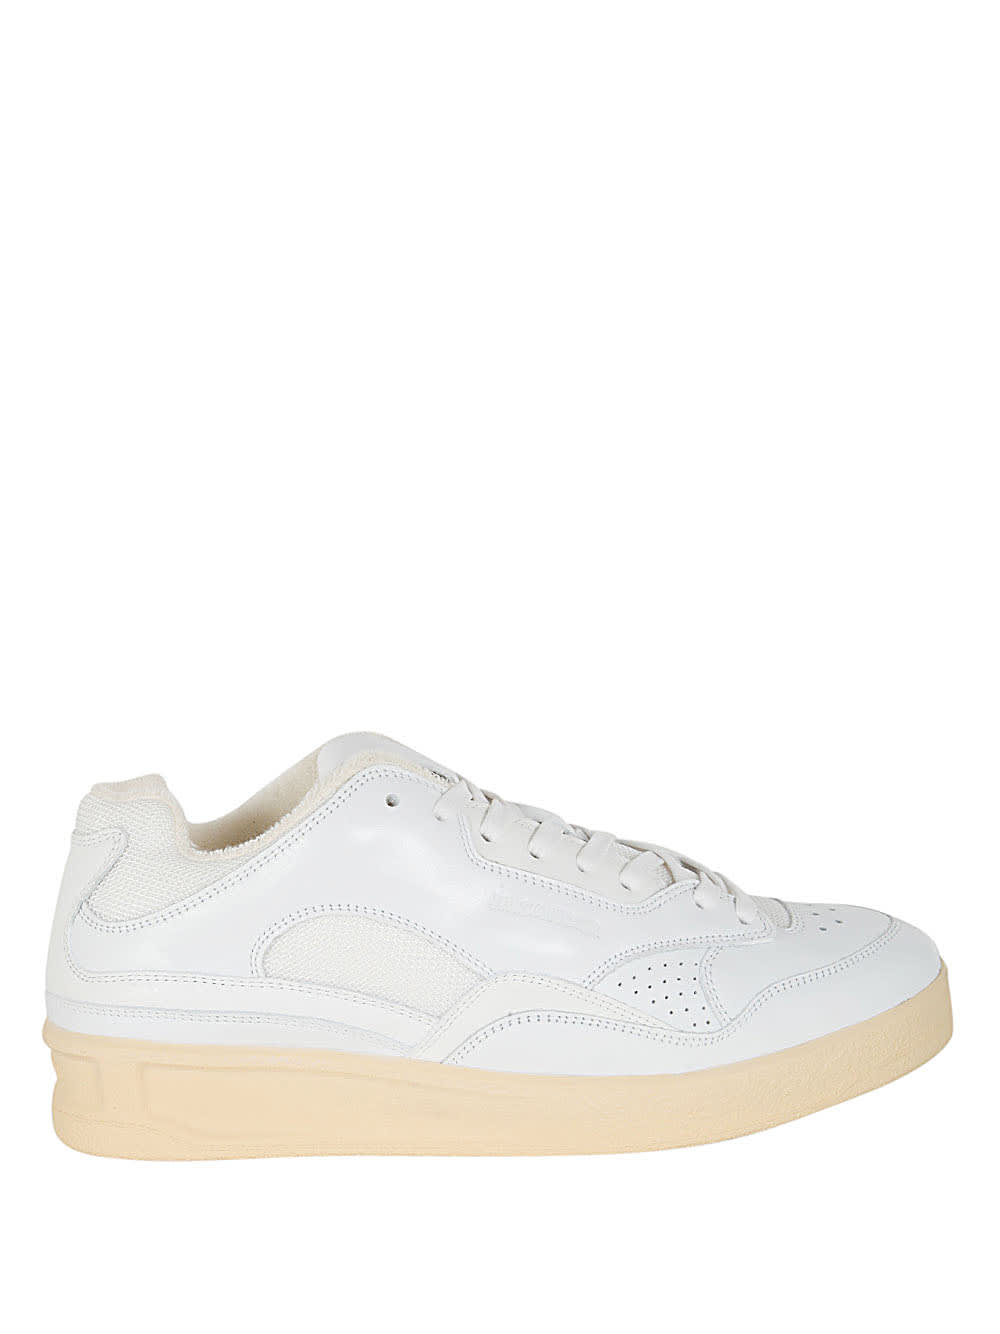 Jil Sander Sneakers Cow Leather Fabric